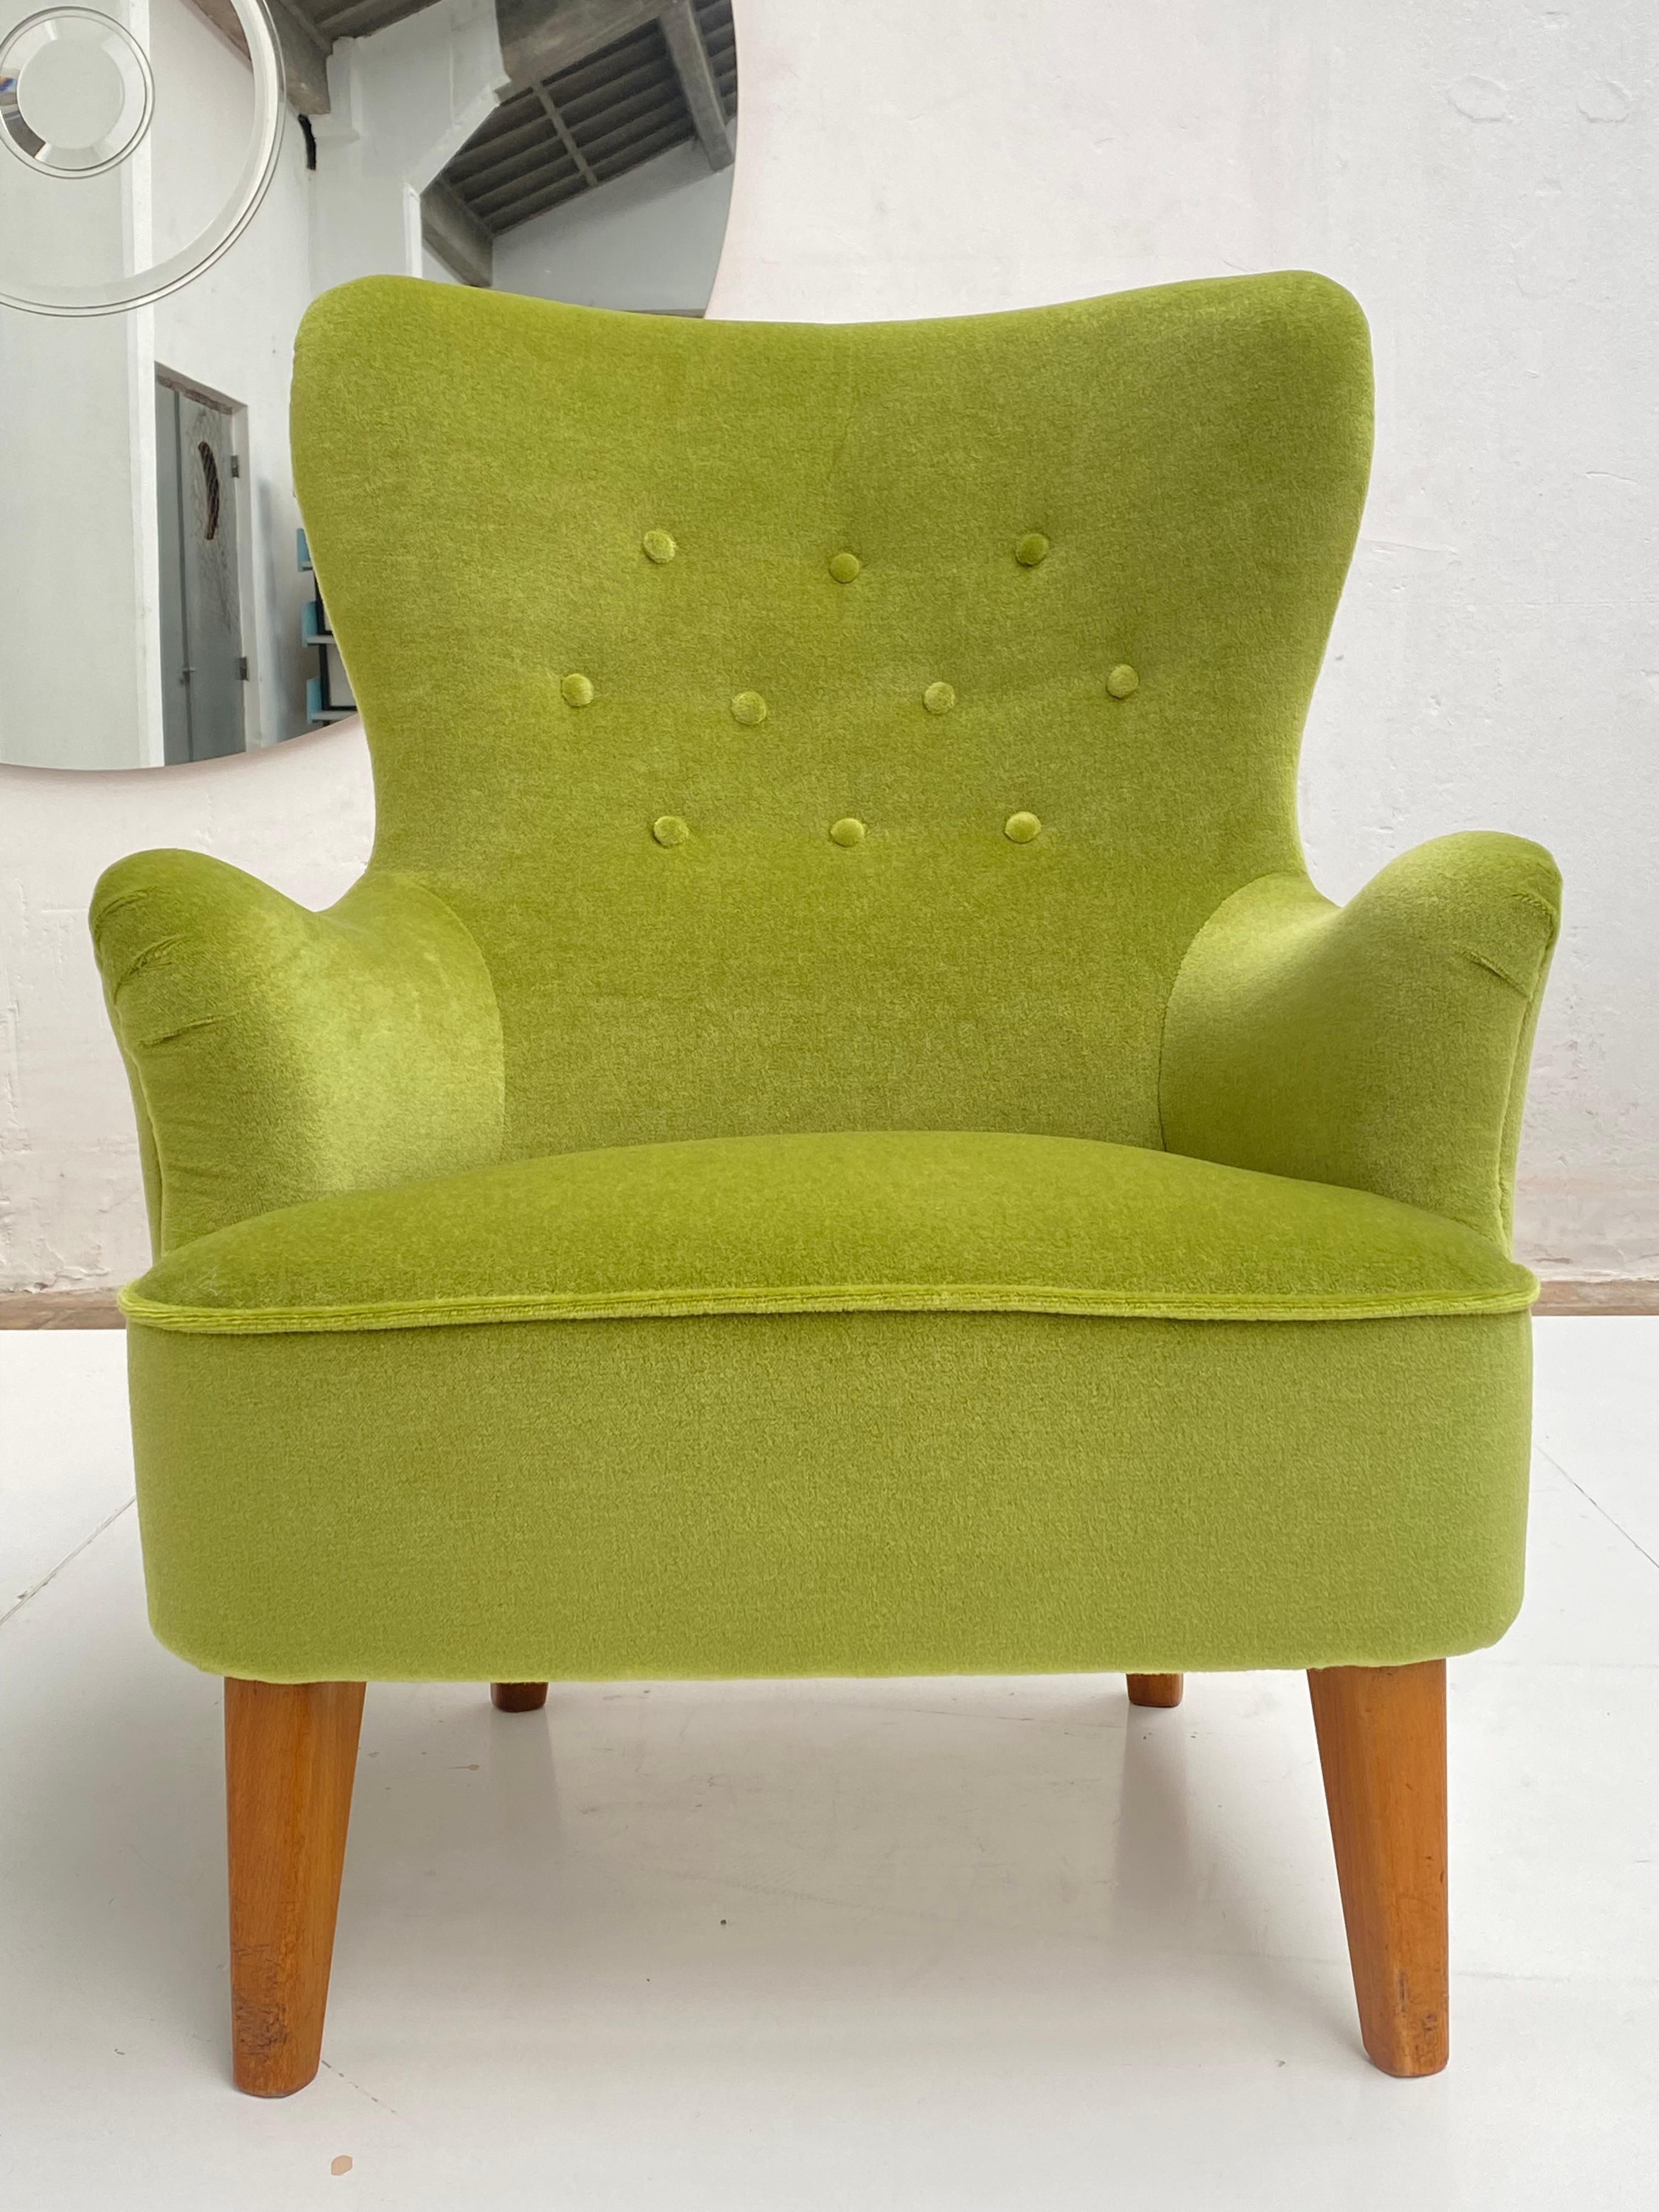 1950's Lounge chair by Dutch designer Theo Ruth for Artifort

Fully restored and upholstered in our in-house upholstery atelier (see last 2 photo's)
We used a vivid forrest green Mohair `Wool Velvet 'Musco' fabric by Dutch manufacturer De